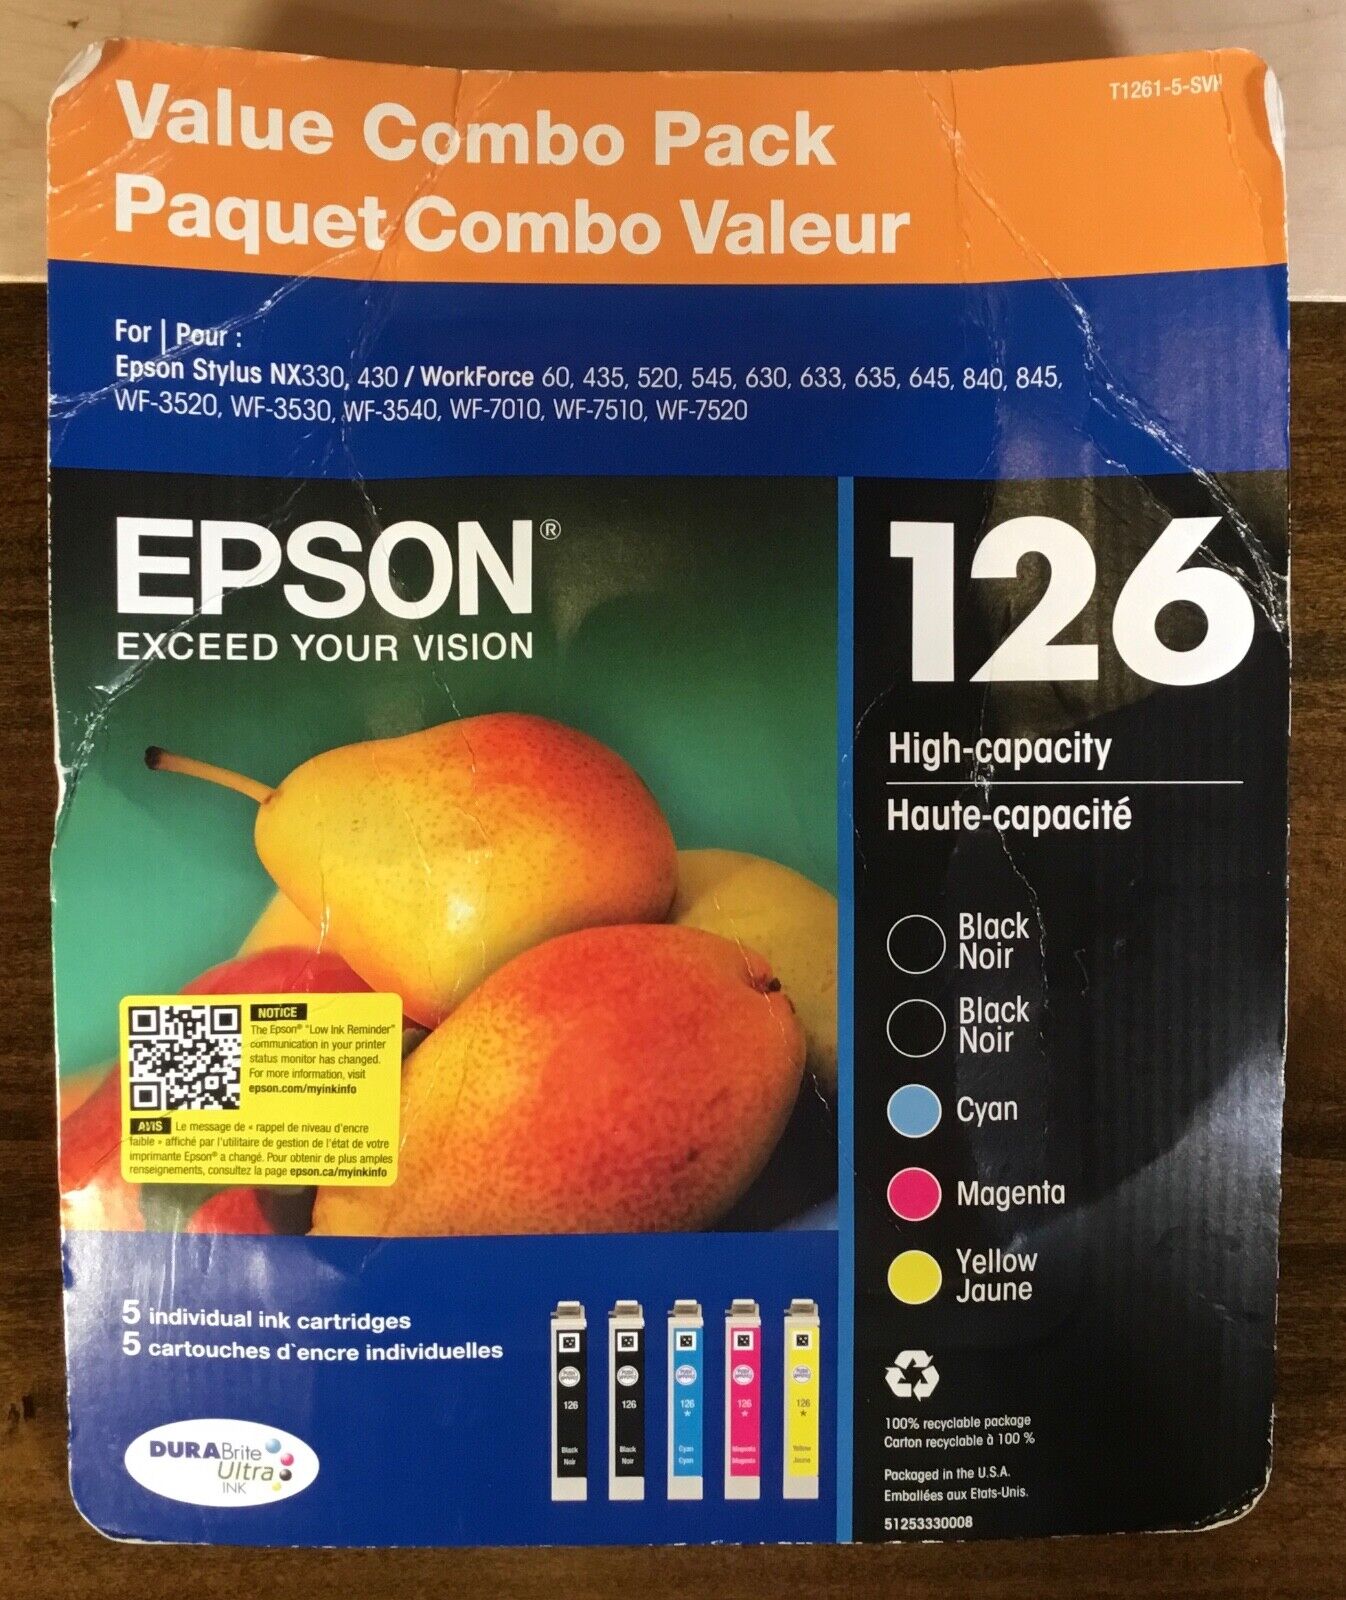 Epson 126 High-Capacity Value Combo Pack